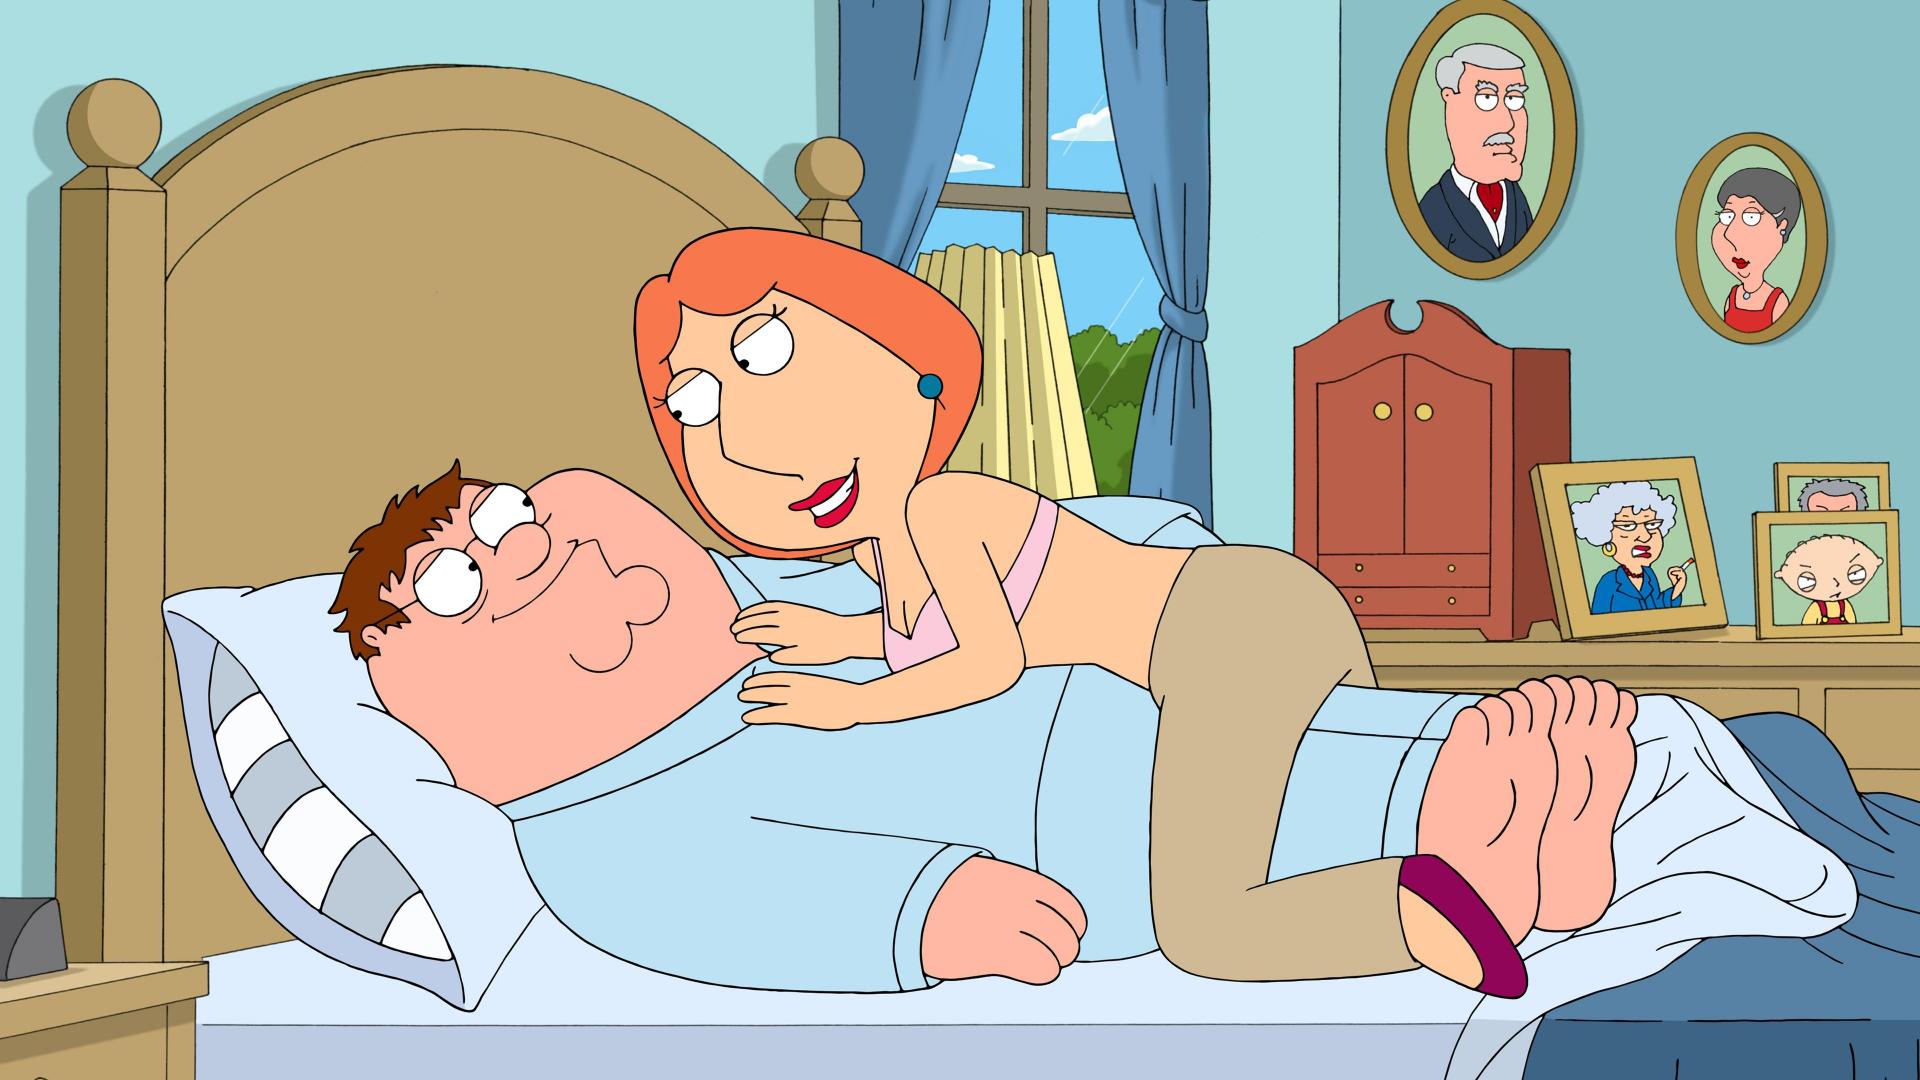 Family guy peter griffin lois wallpaper HD 1920x1080.